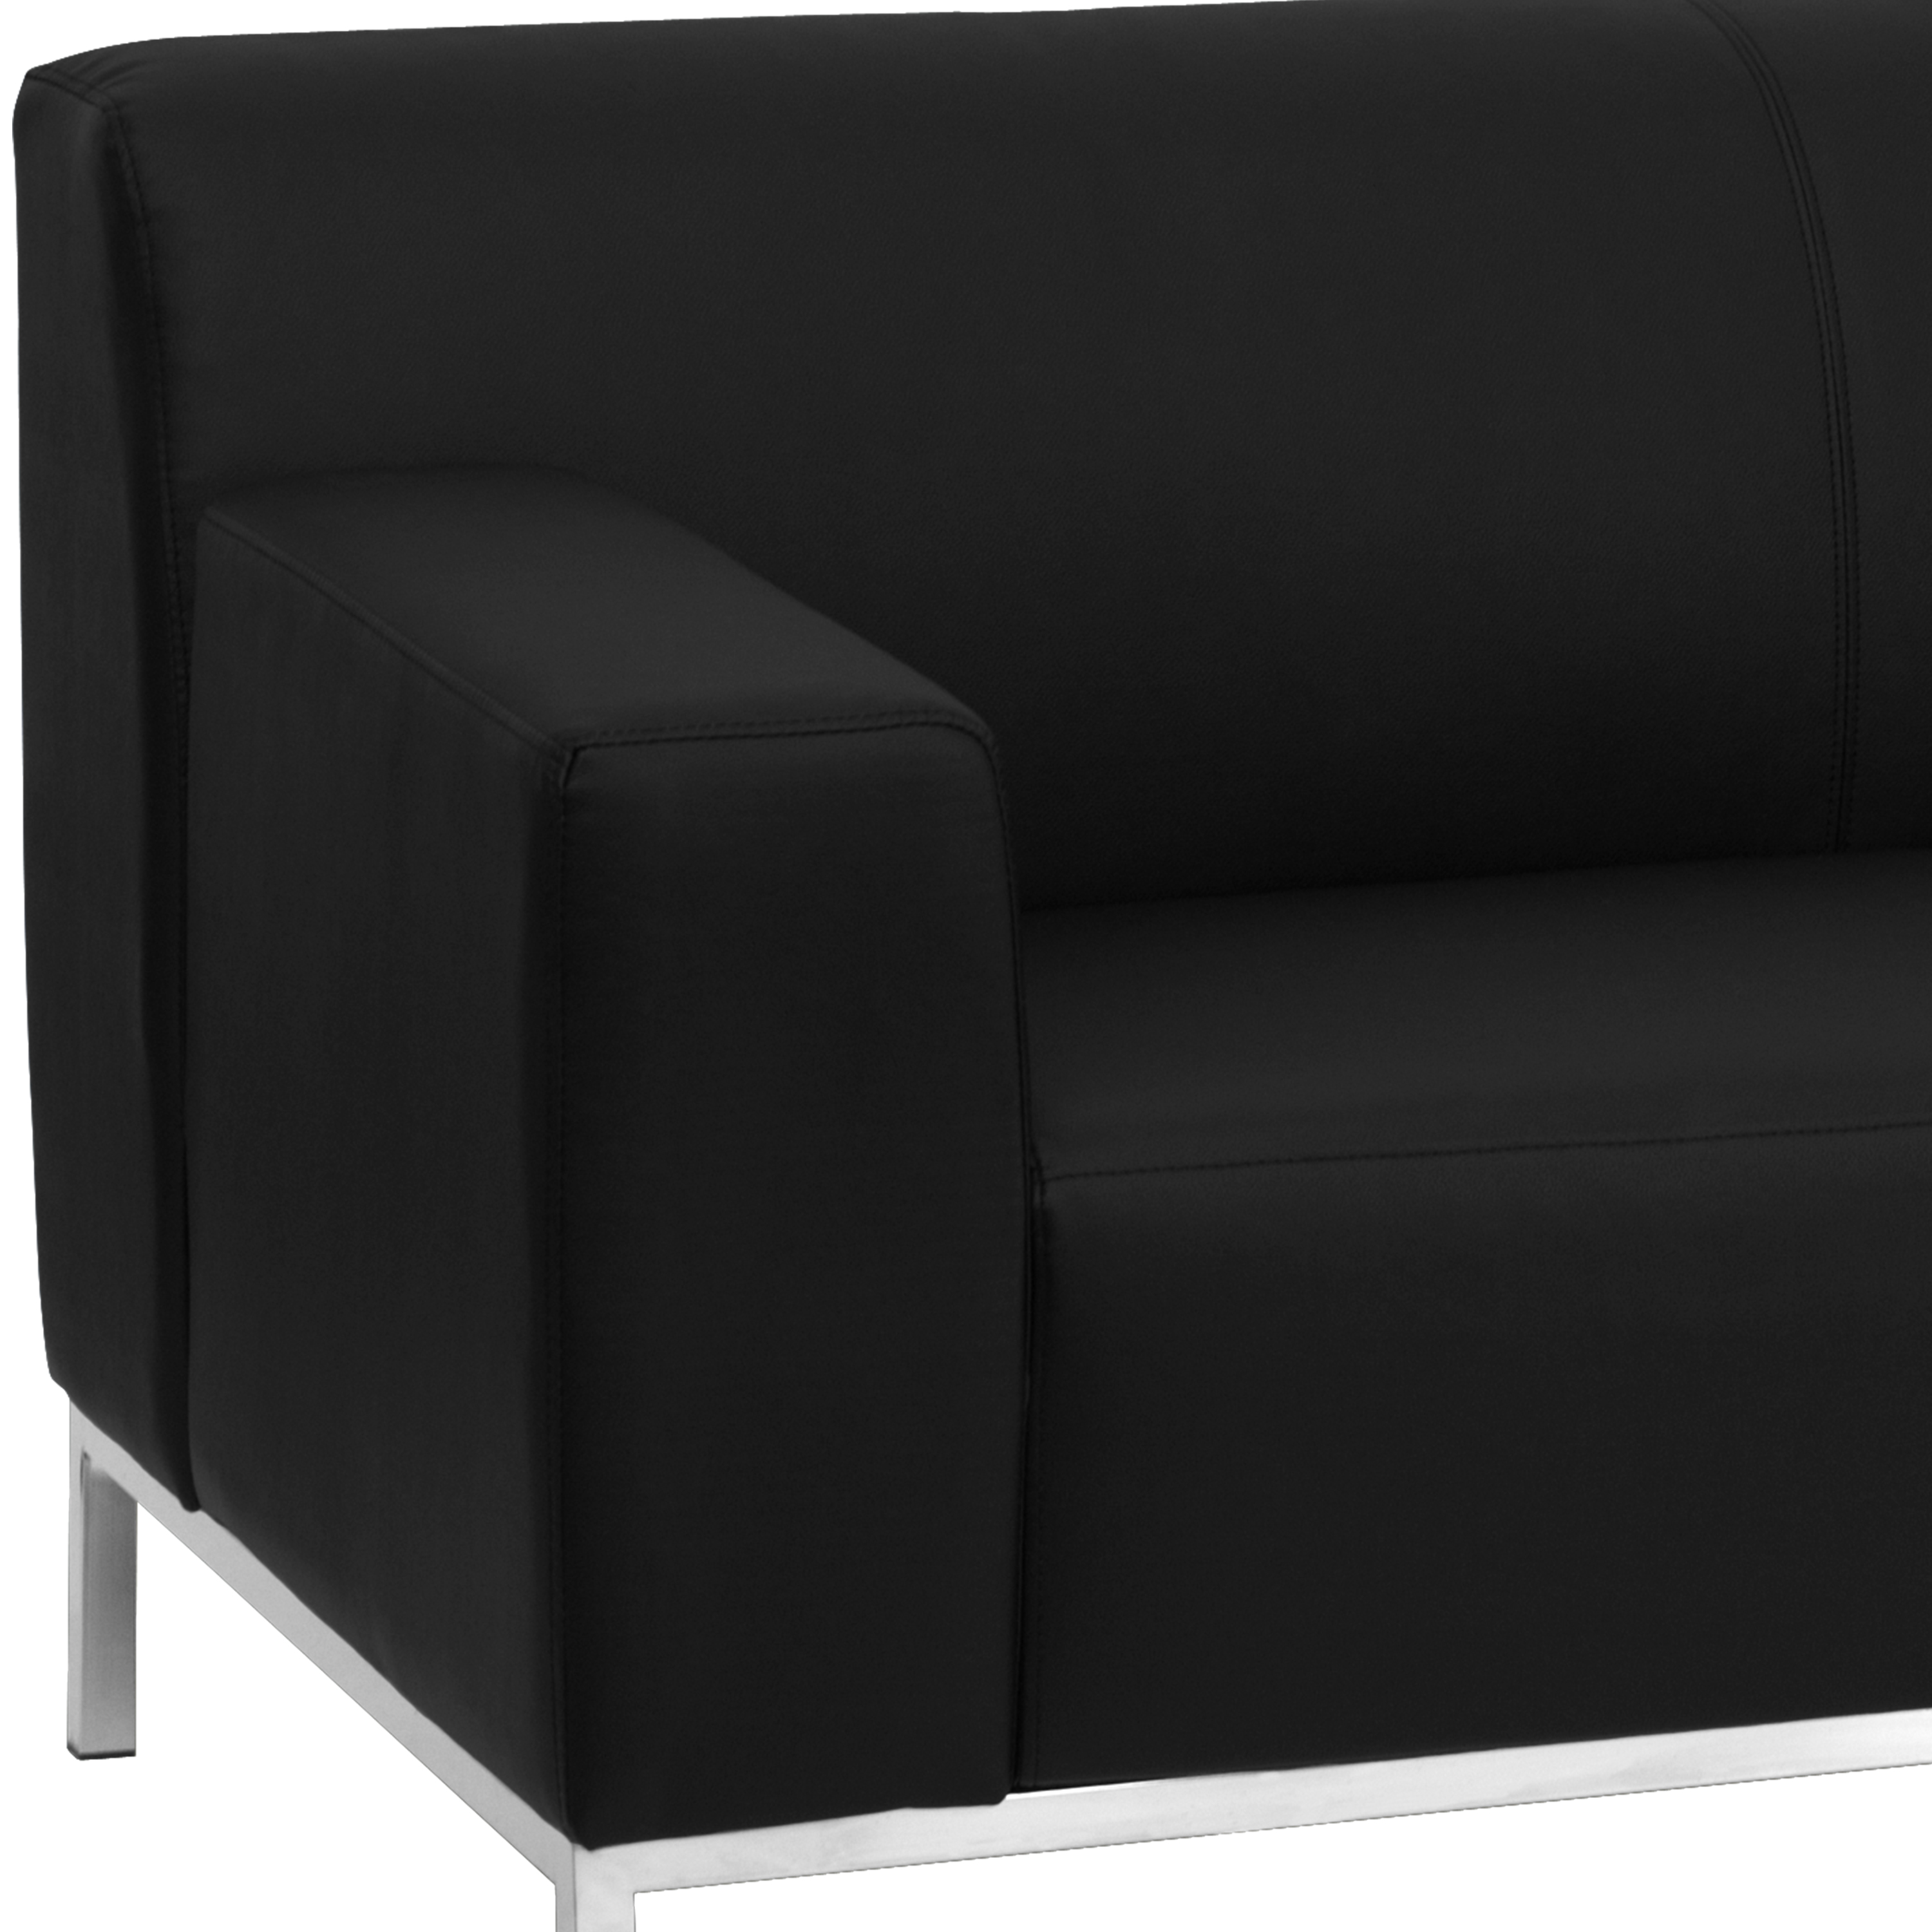 Flash Furniture HERCULES Definity Series Contemporary Black LeatherSoft Loveseat - image 4 of 5